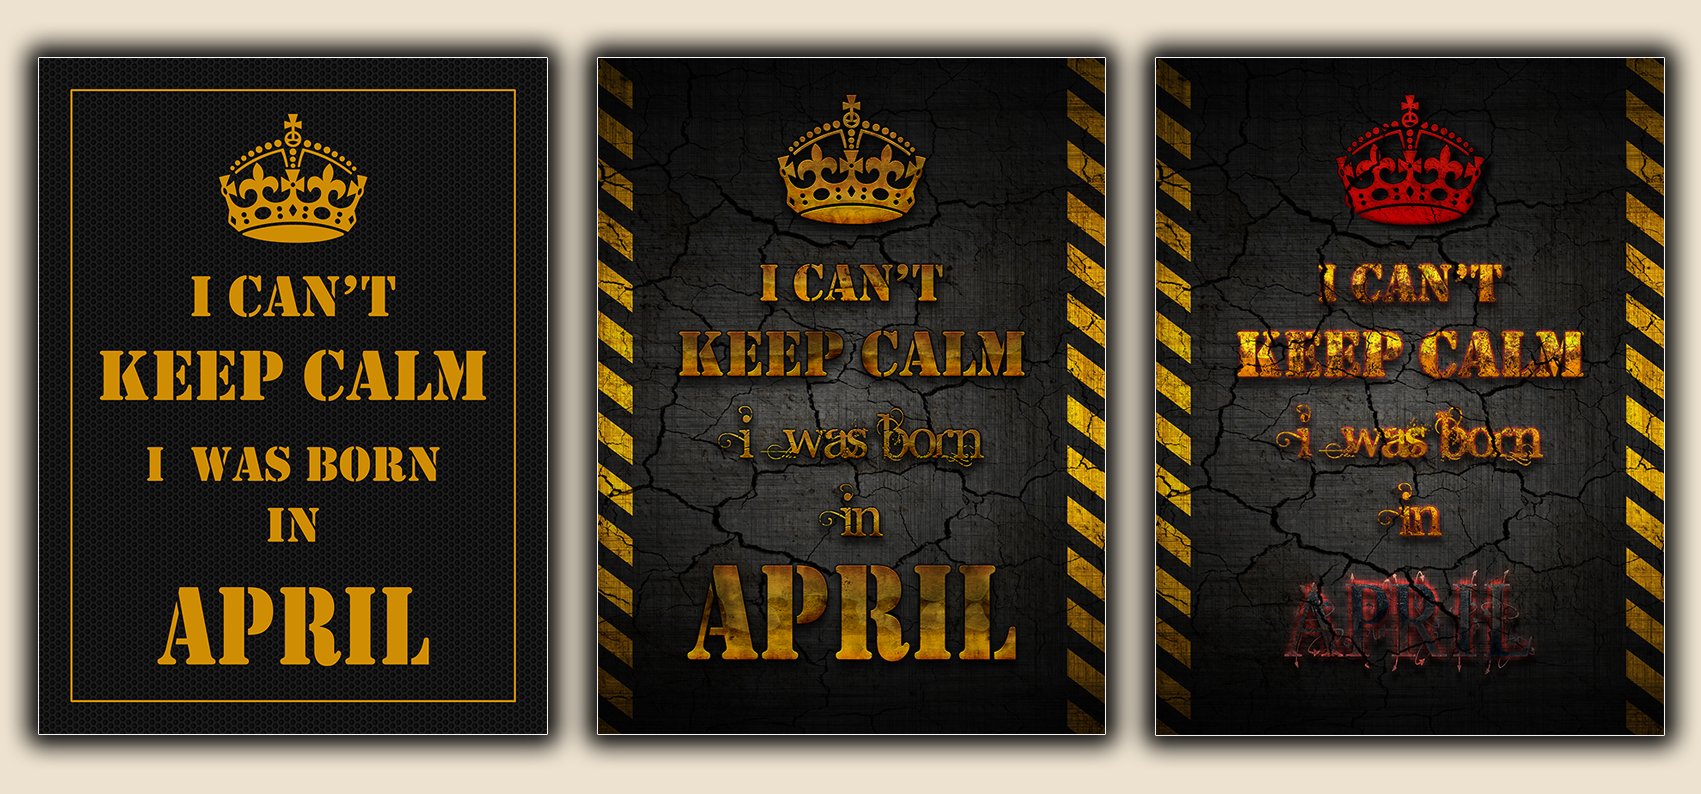 I Can't Keep Calm - I was Born in April